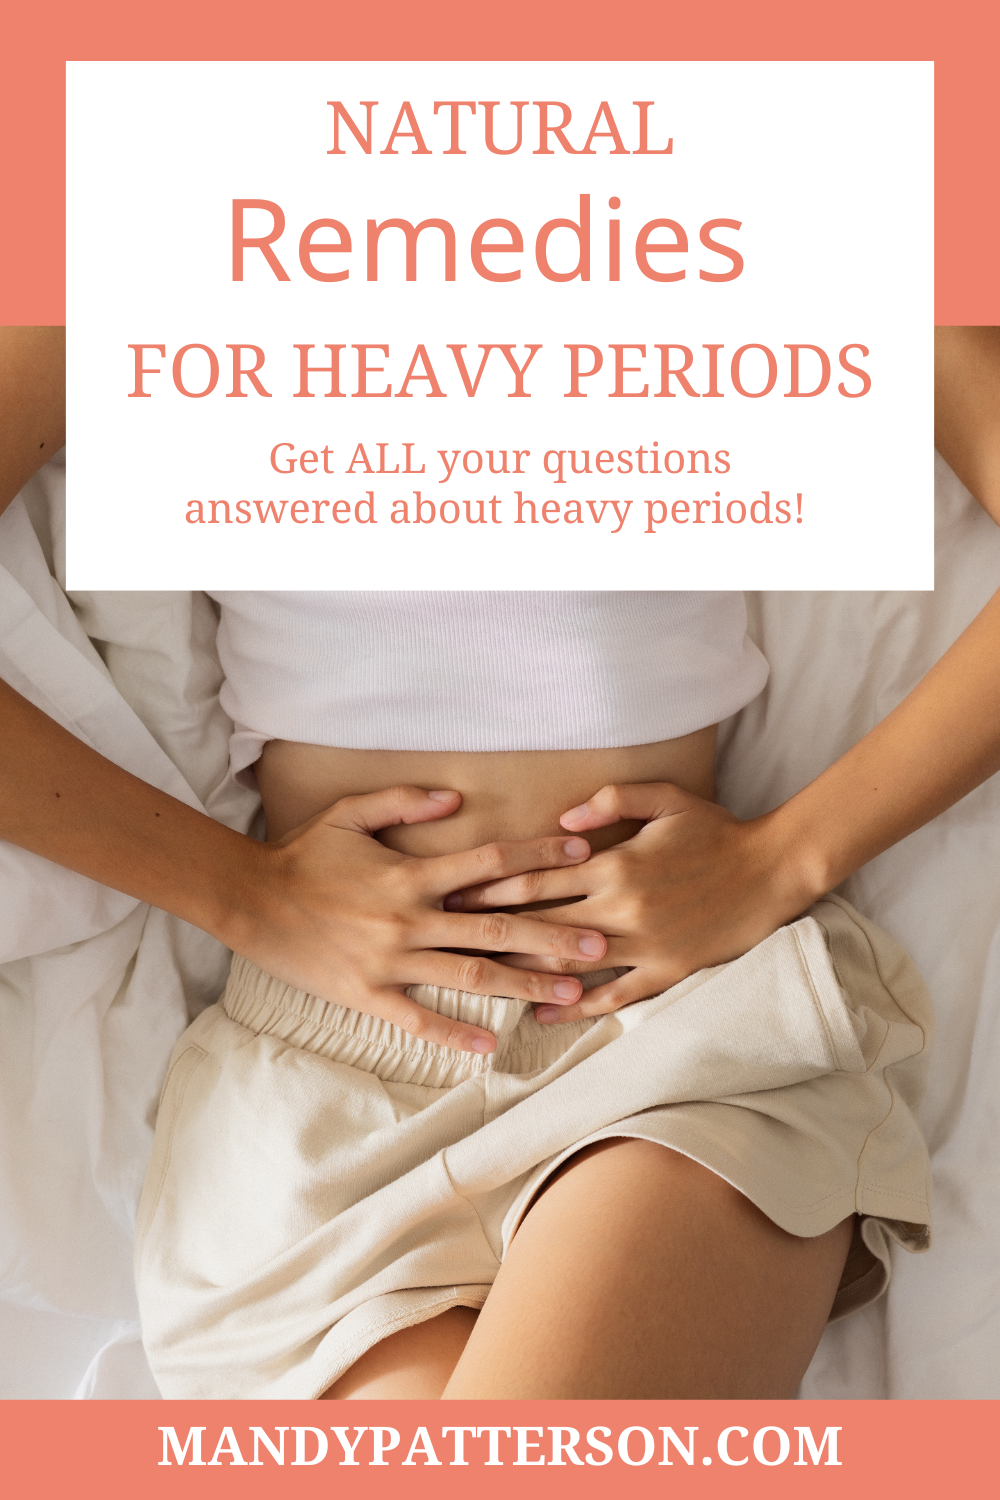 Natural Remedies for Heavy Periods